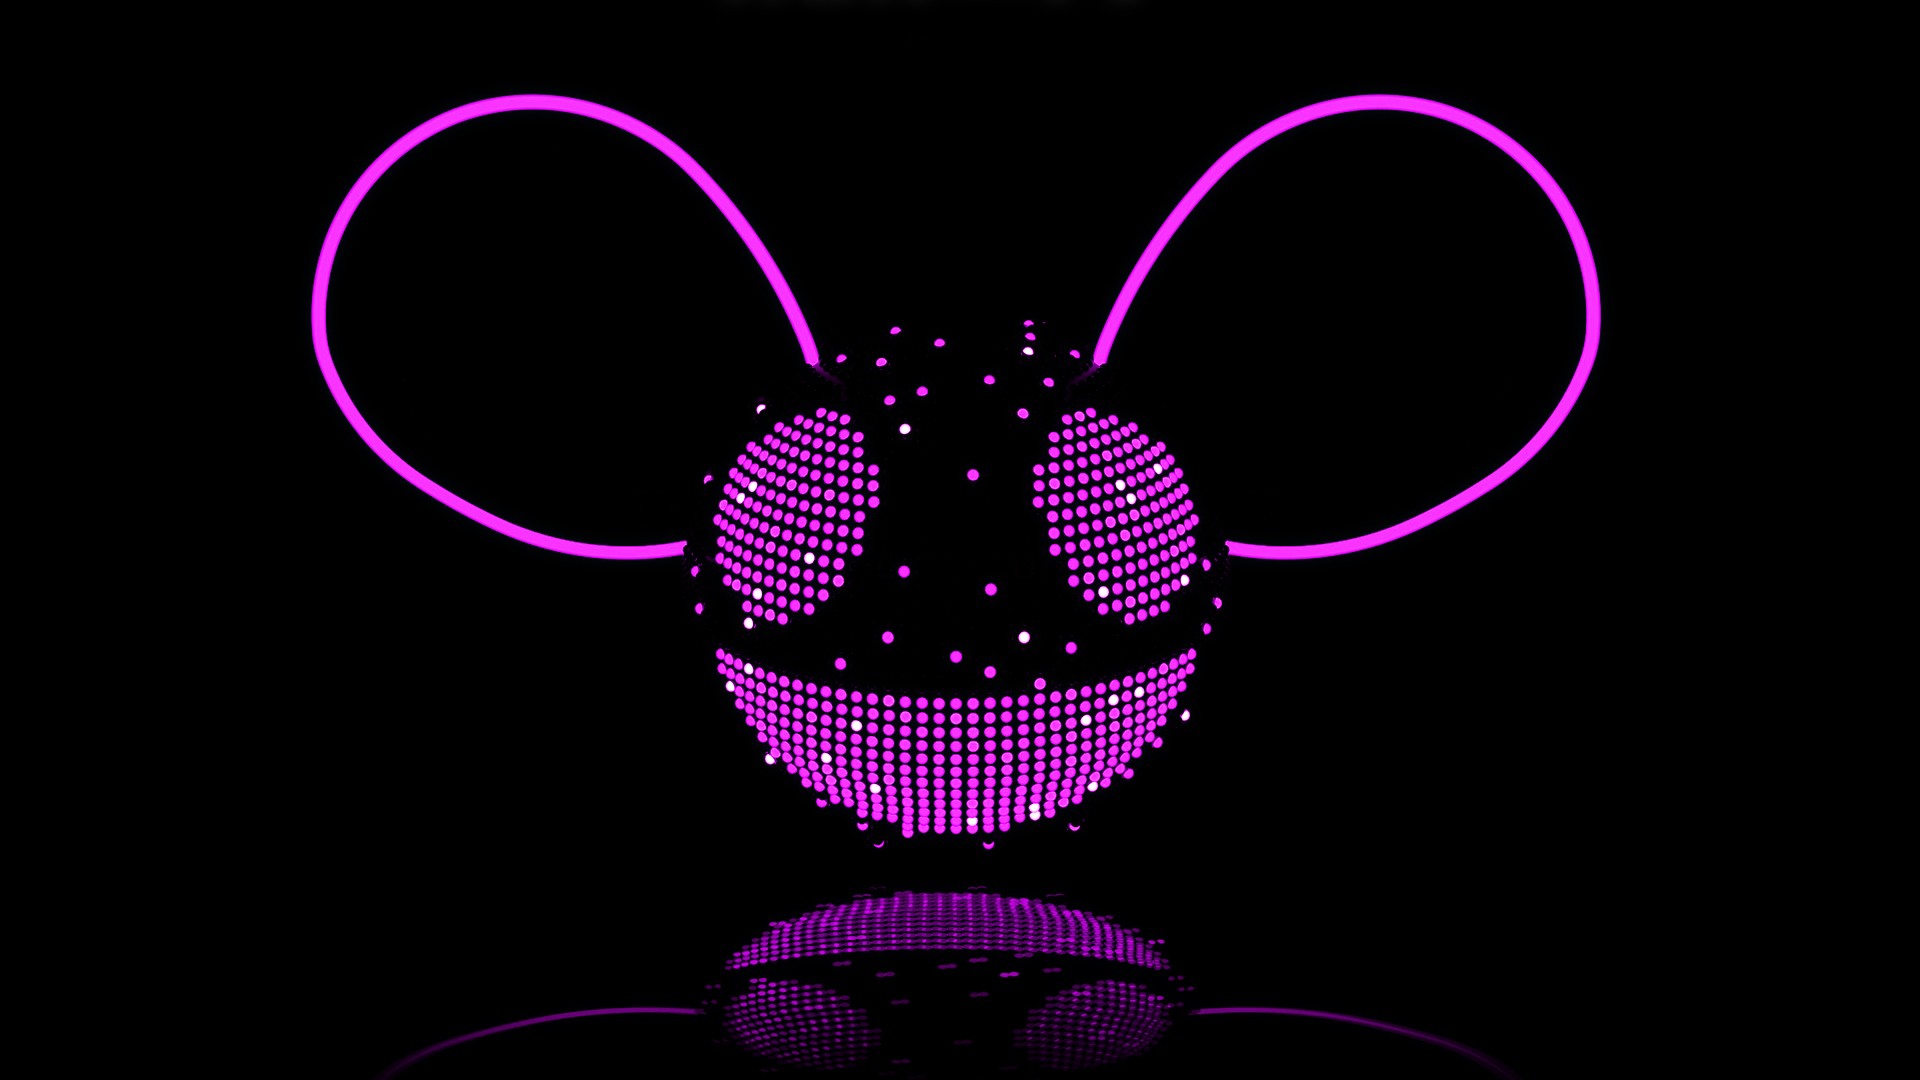 General 1920x1080 Deadmau5 mouse ears digital art neon black background reflection music simple background electronic music